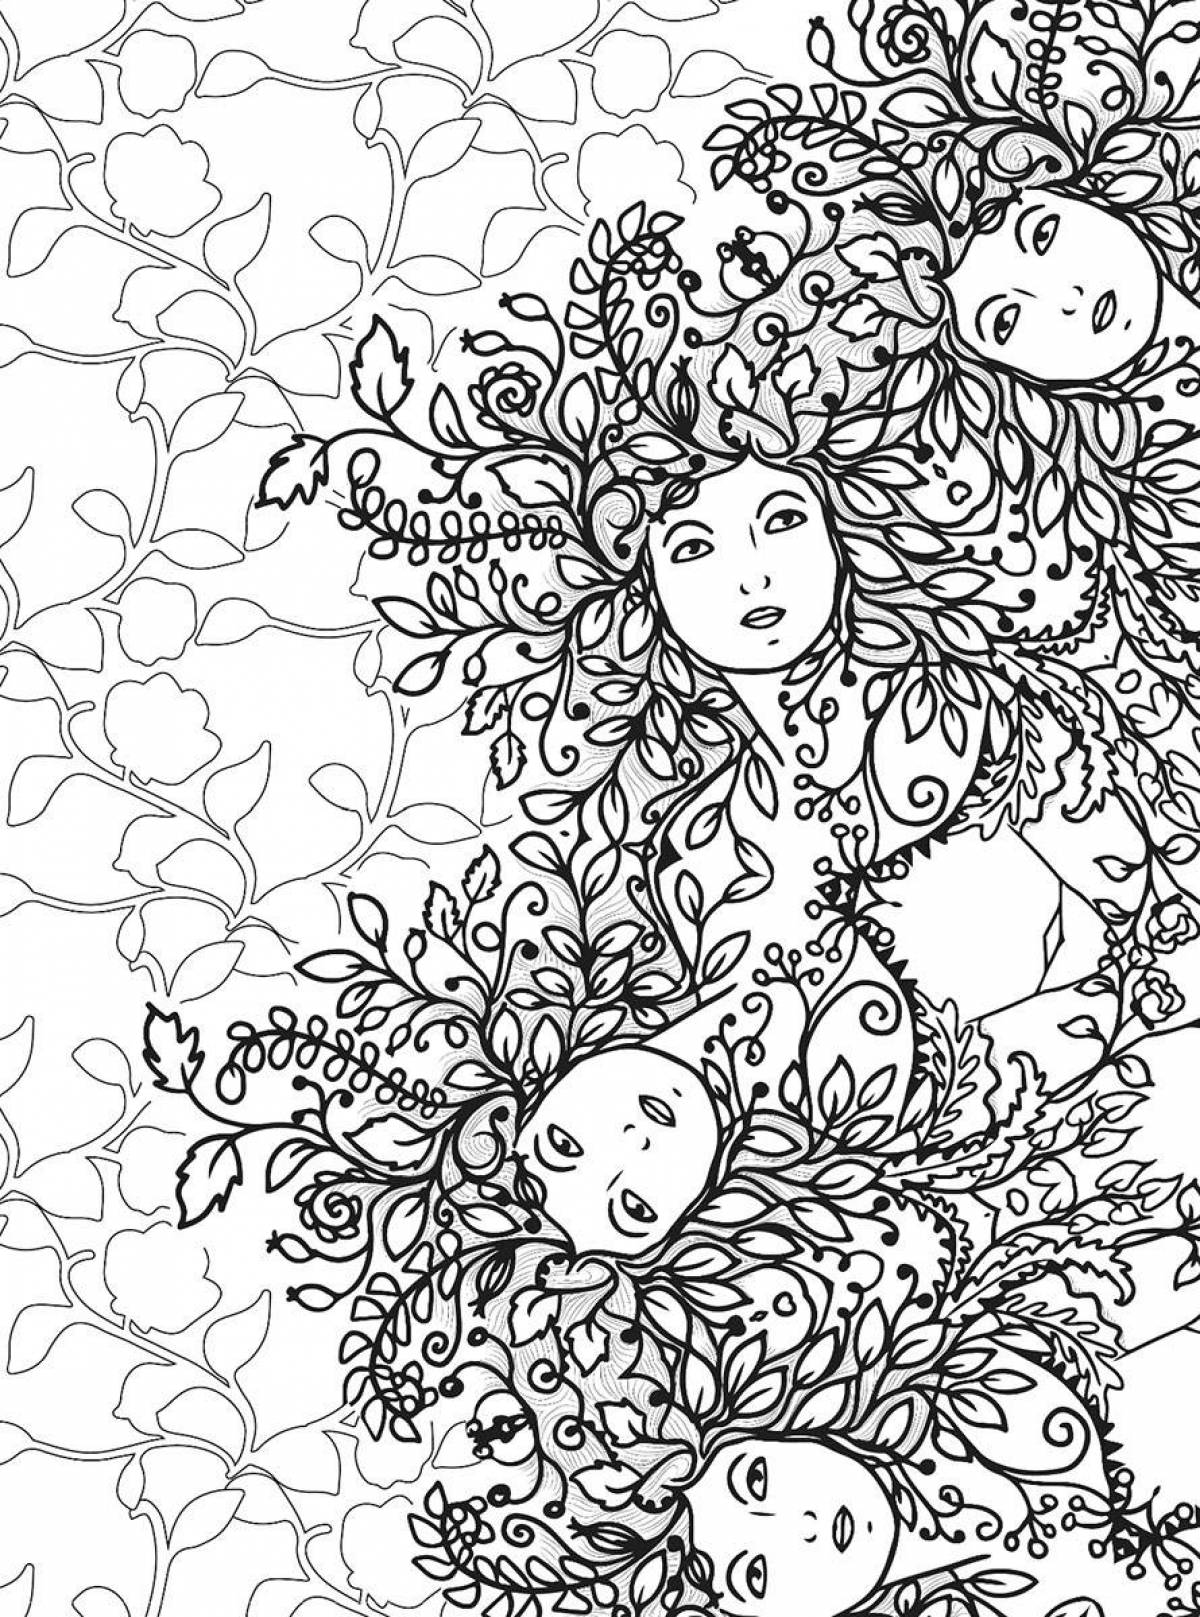 Color-frenzy coloring page art